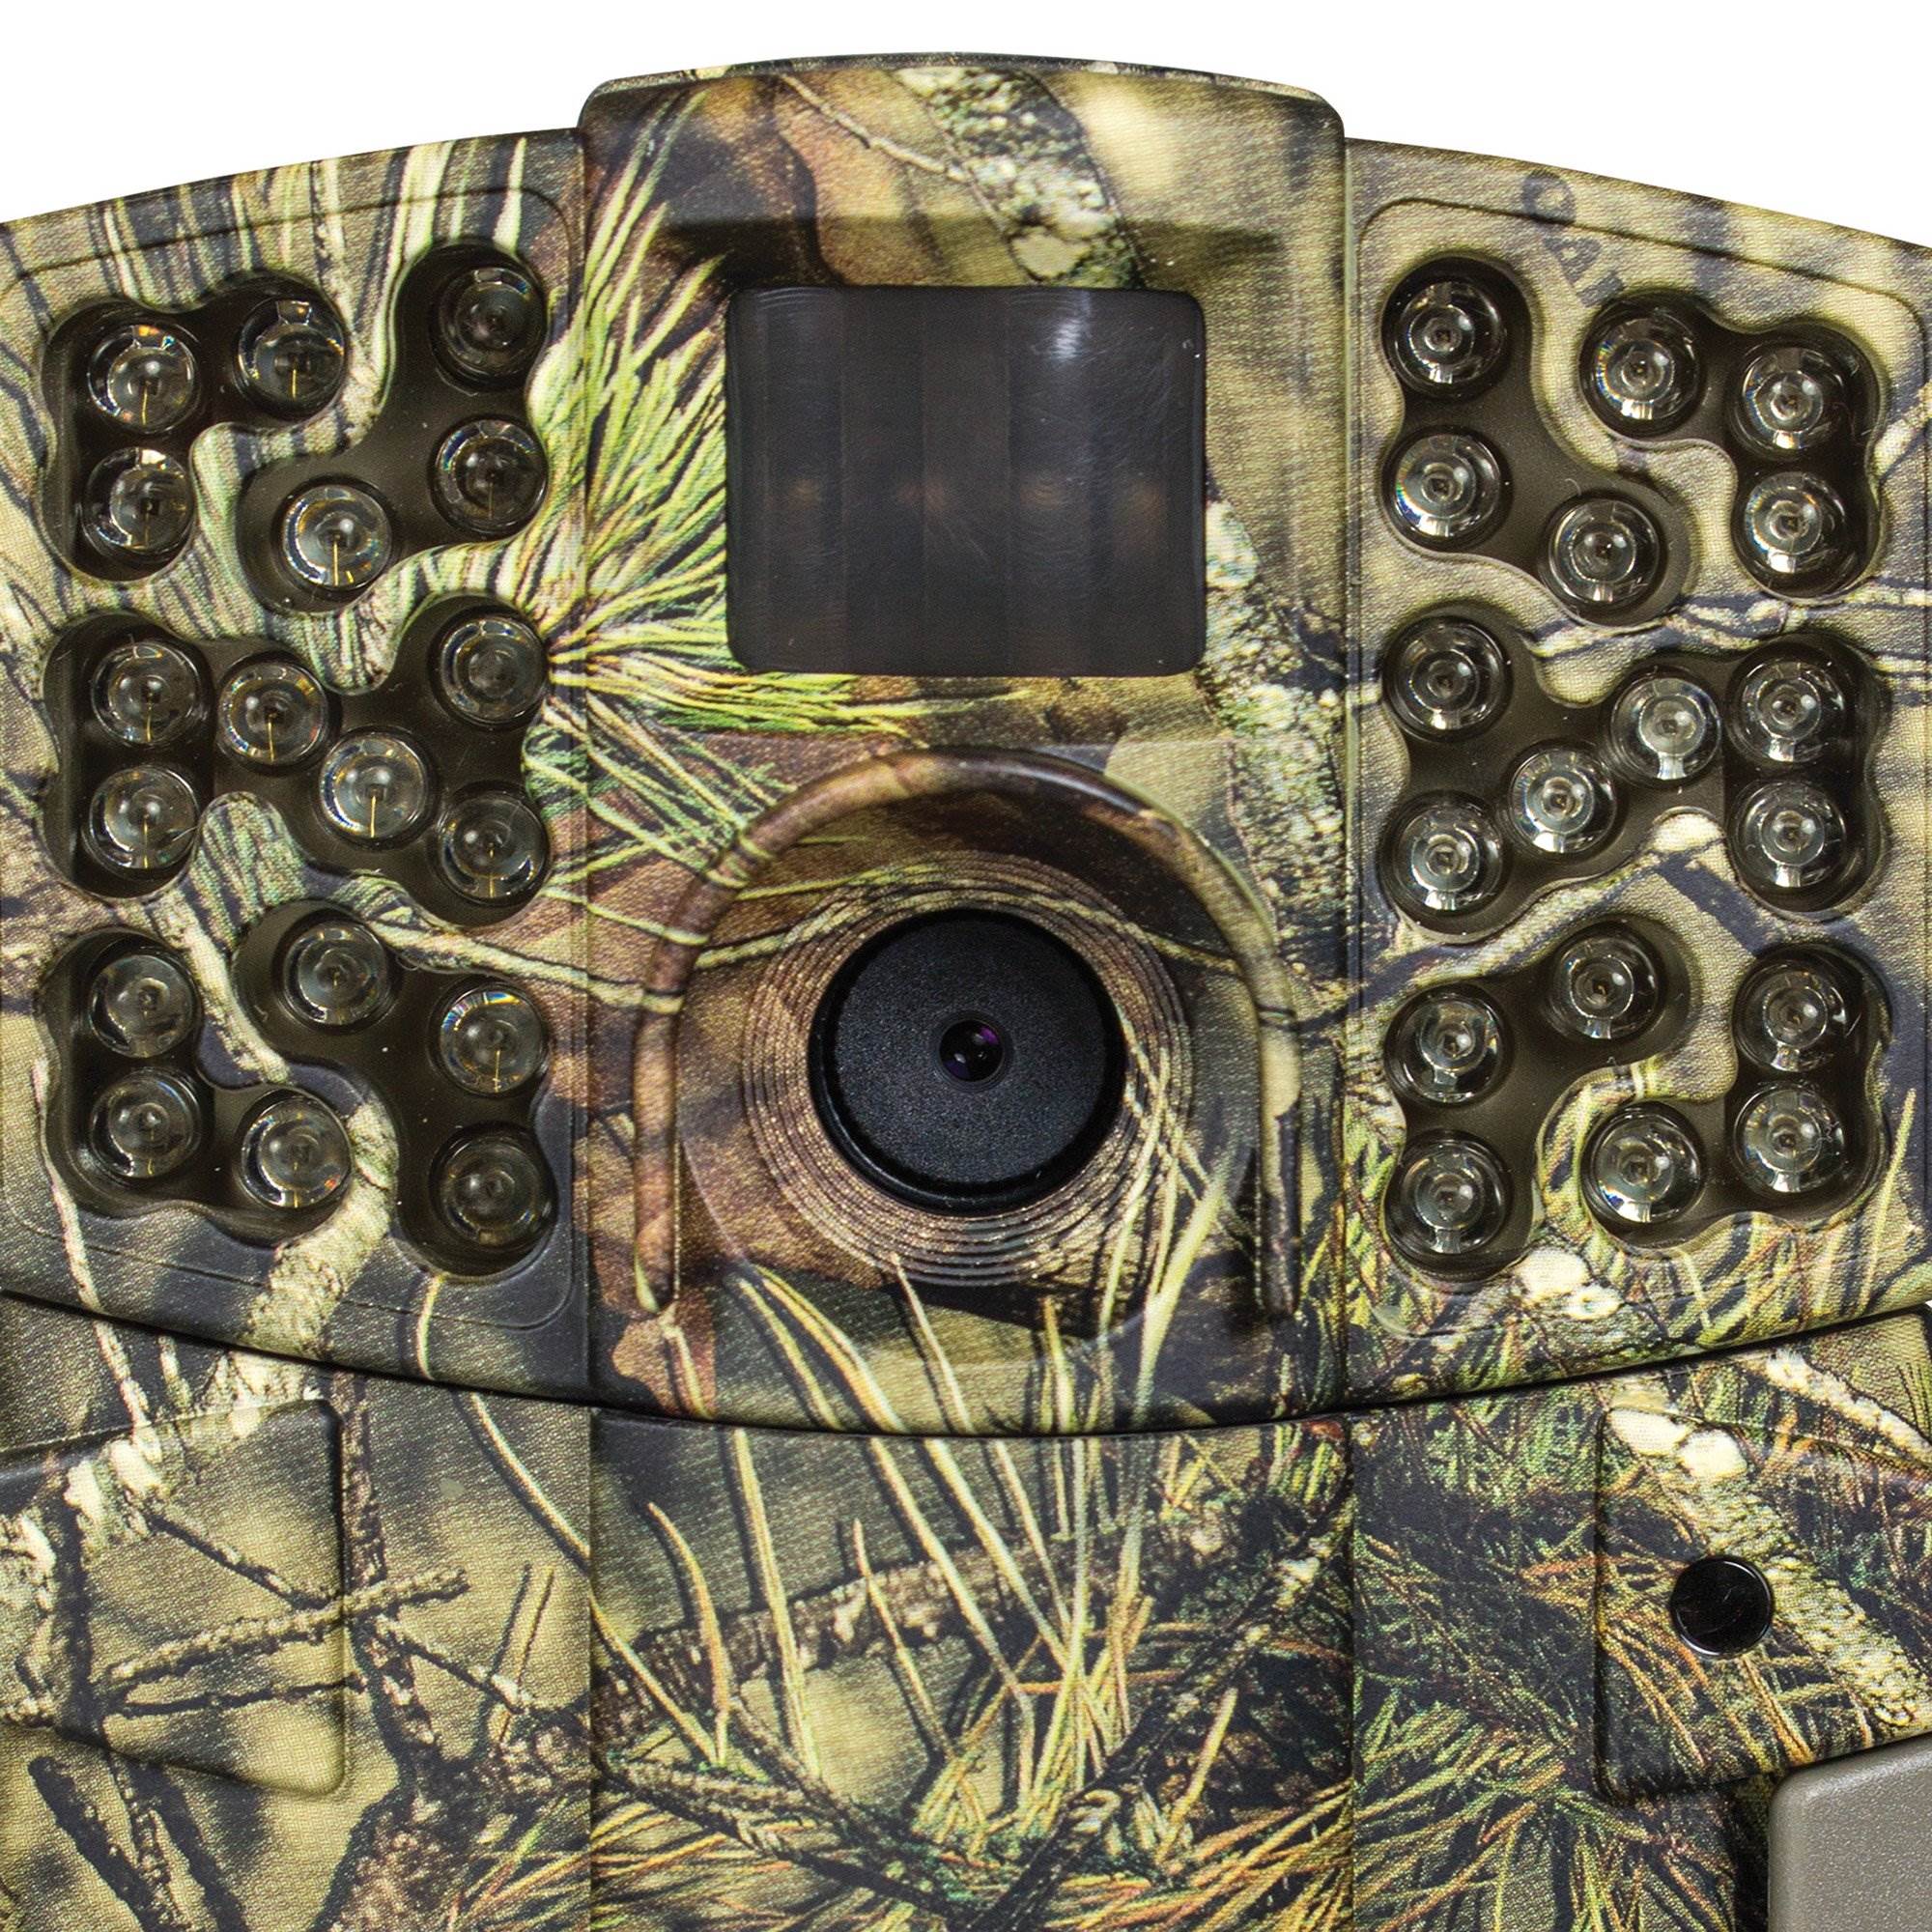 Moultrie M-999i 20 Mega Pixel Game Camera, Mossy Oak Country - image 2 of 5